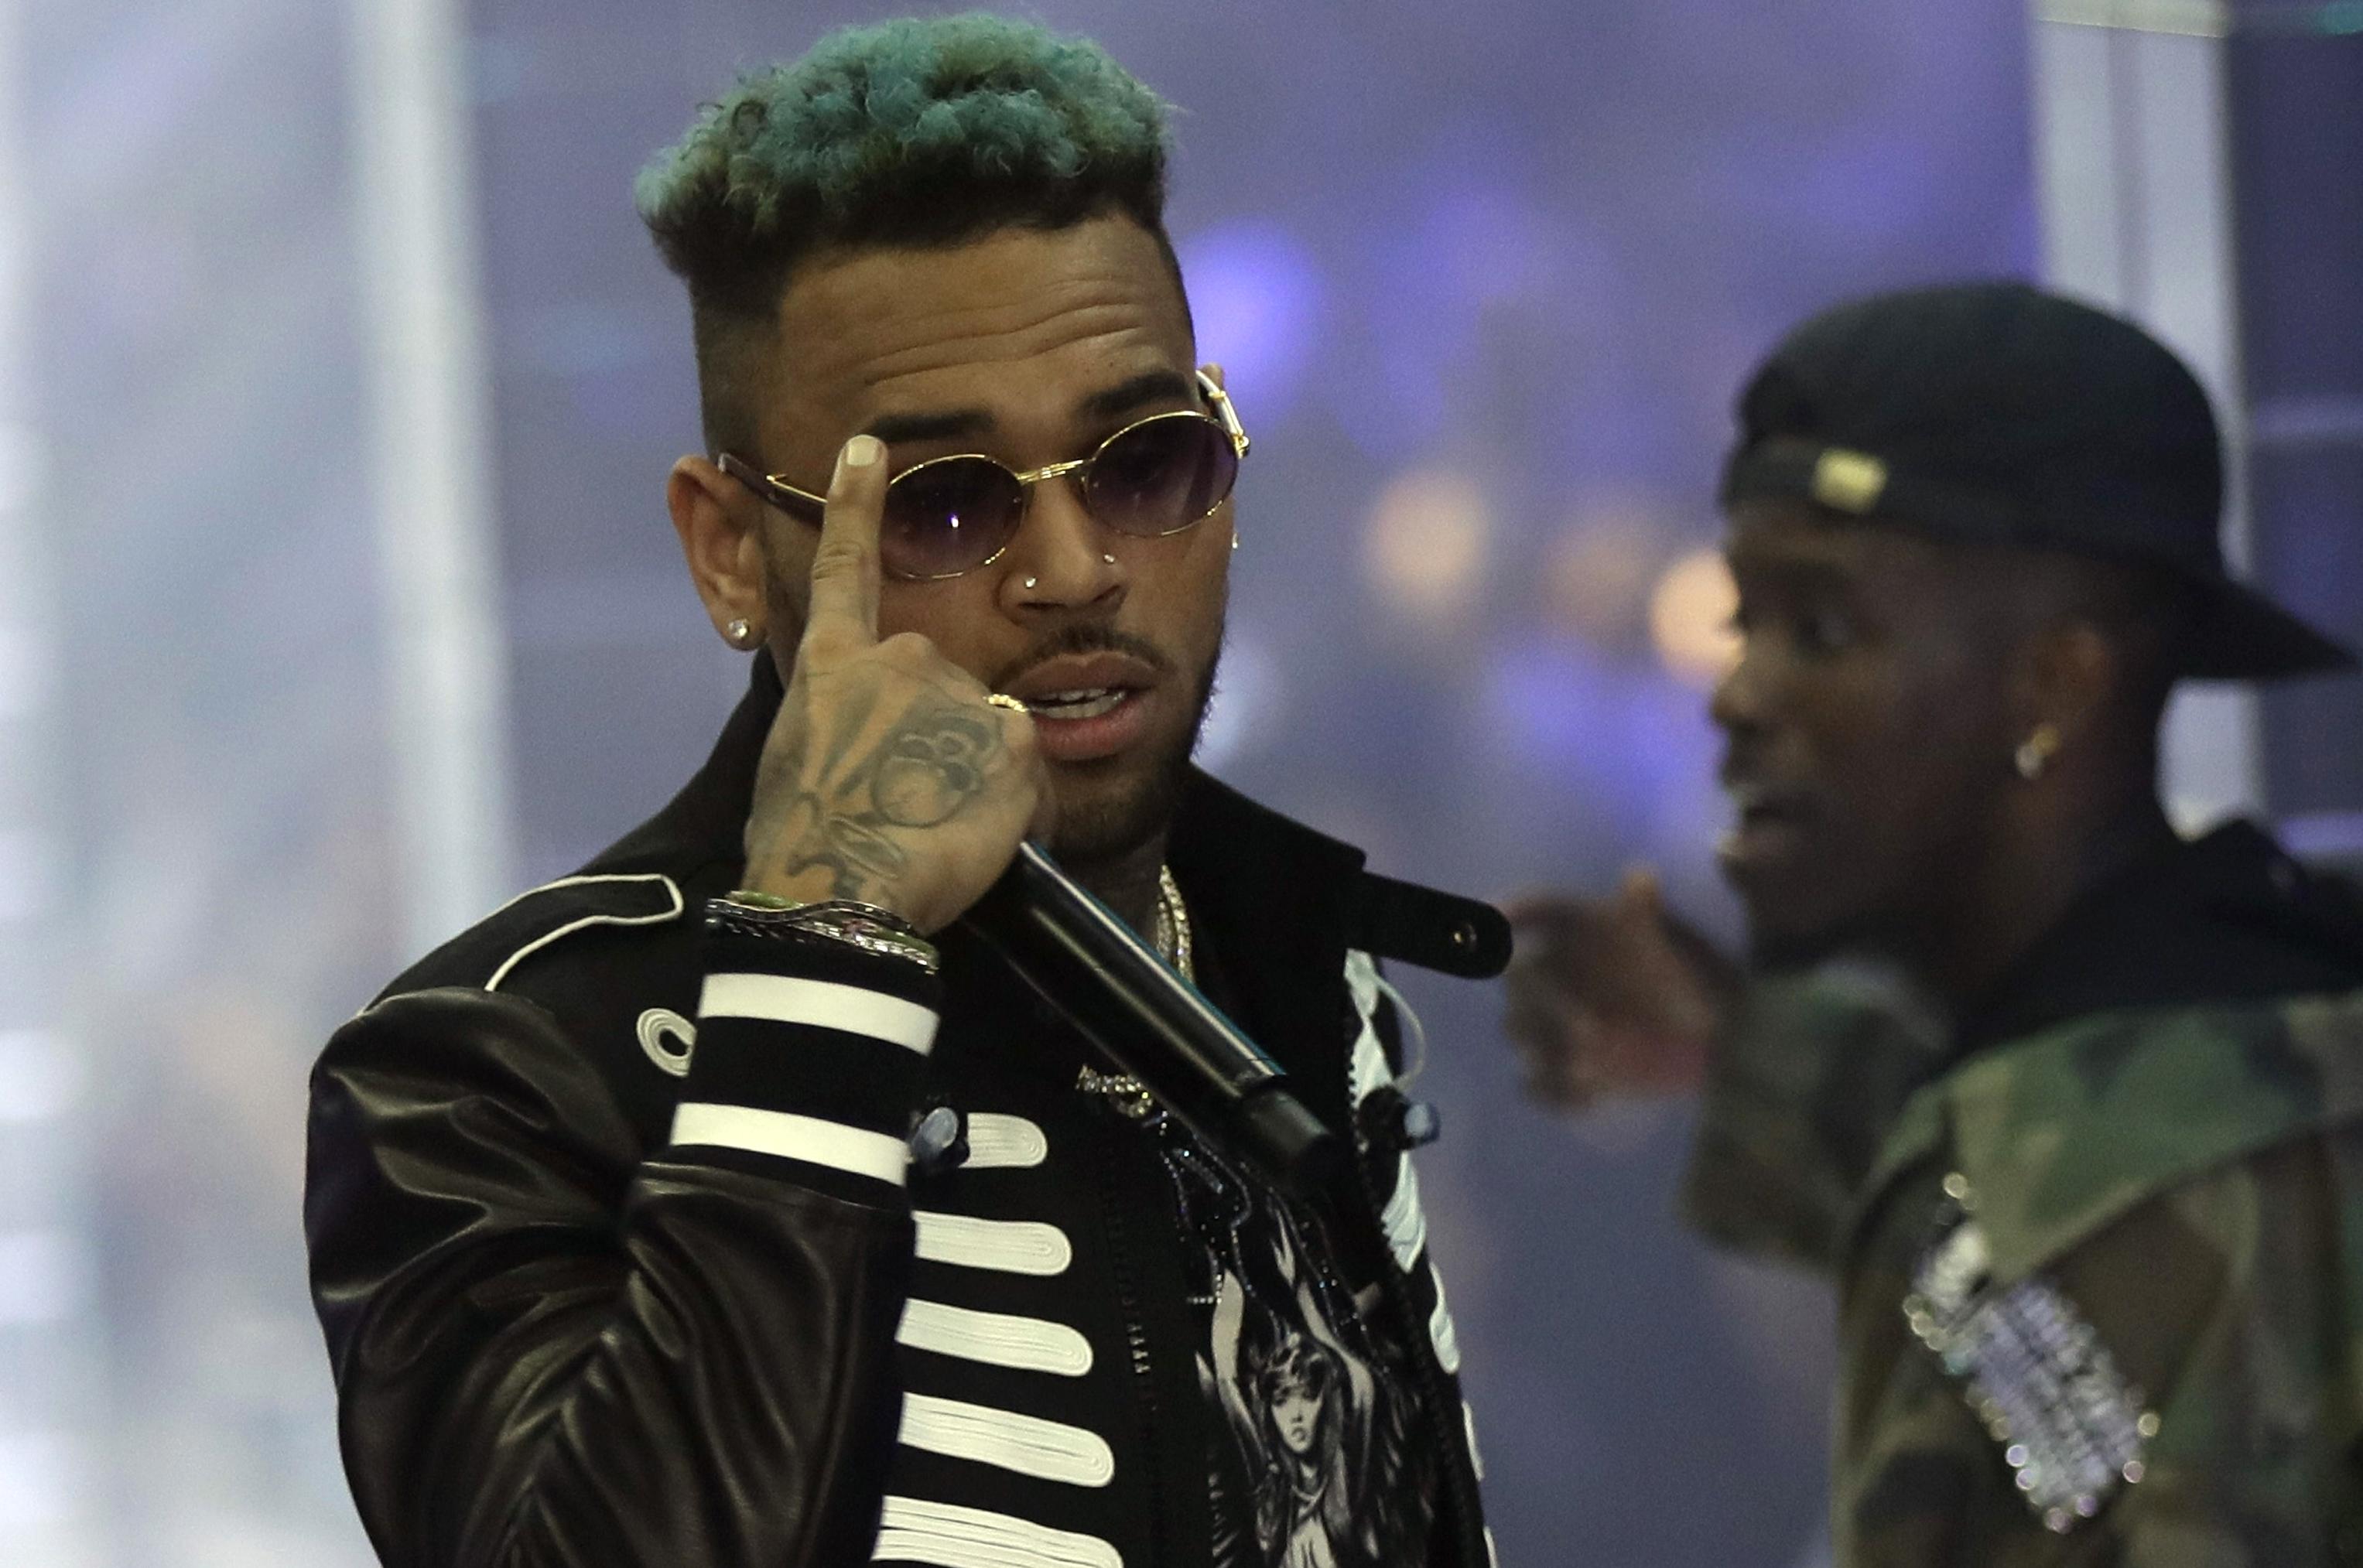 Singer Chris Brown released in Paris after rape complaint The